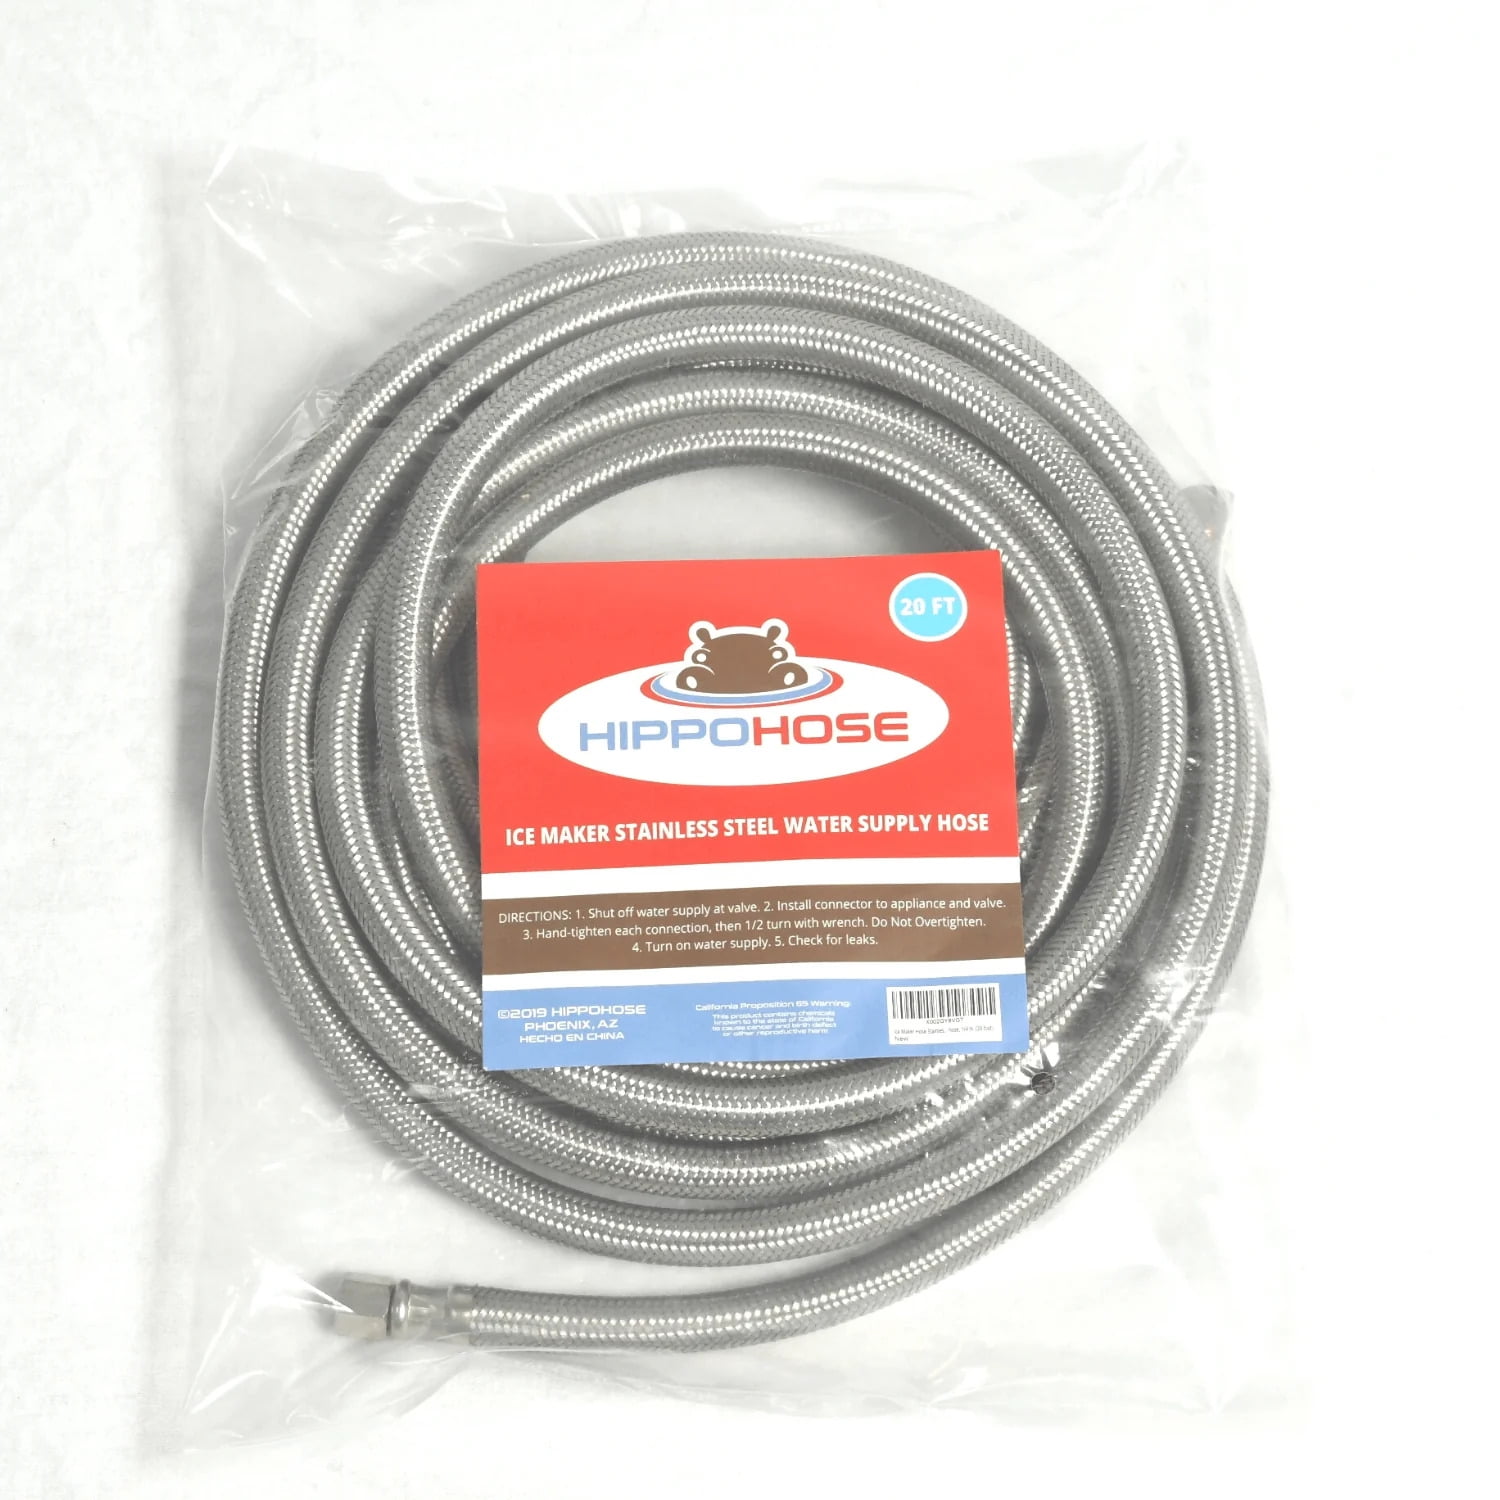 Refrigerator Icemaker Hose (30 FT) - Universal Fit to ALL Refrigerator  Brands - Icemaker Water Supply Line - ¼” x ¼” Connections - SS Refrigerator  Supply Hose for Ice & Water 